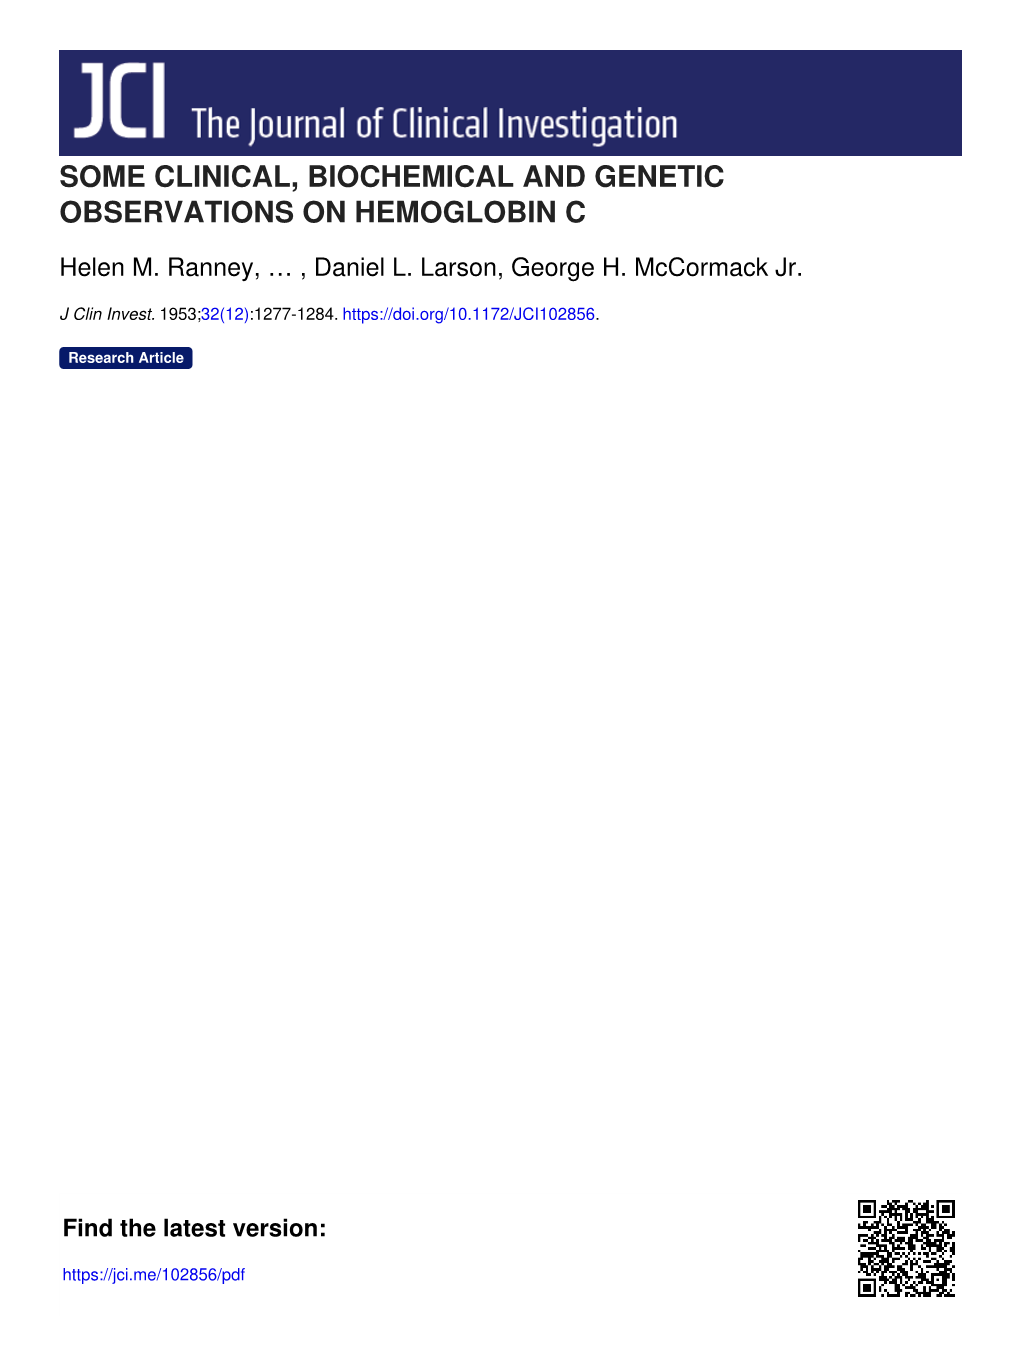 Some Clinical, Biochemical and Genetic Observations on Hemoglobin C